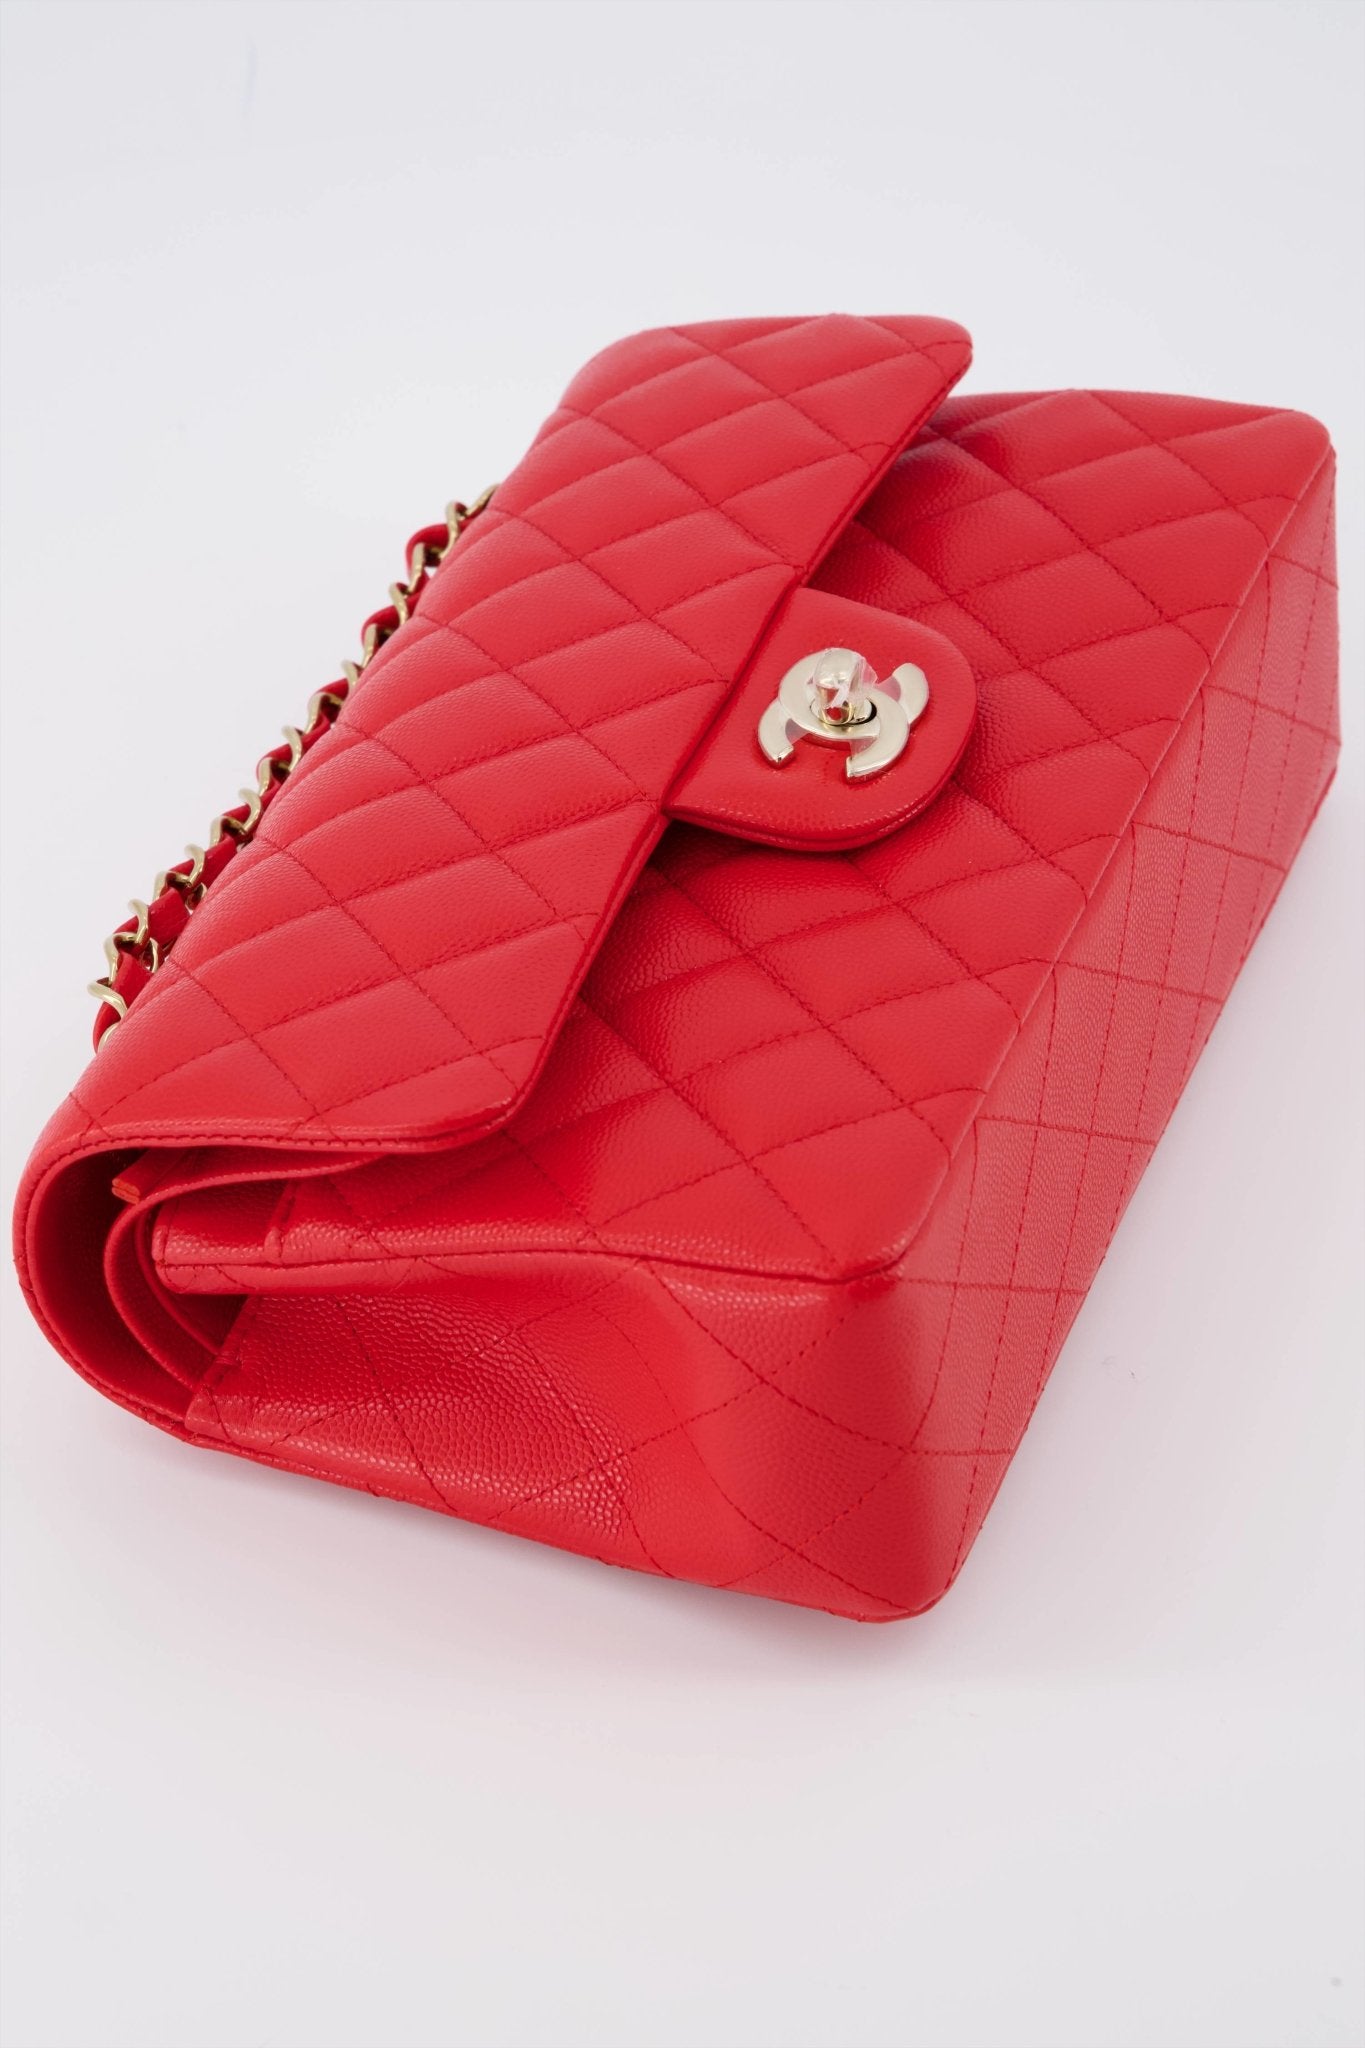 Chanel Red Quilted Lambskin Mini Flap Bag Brushed Gold Hardware